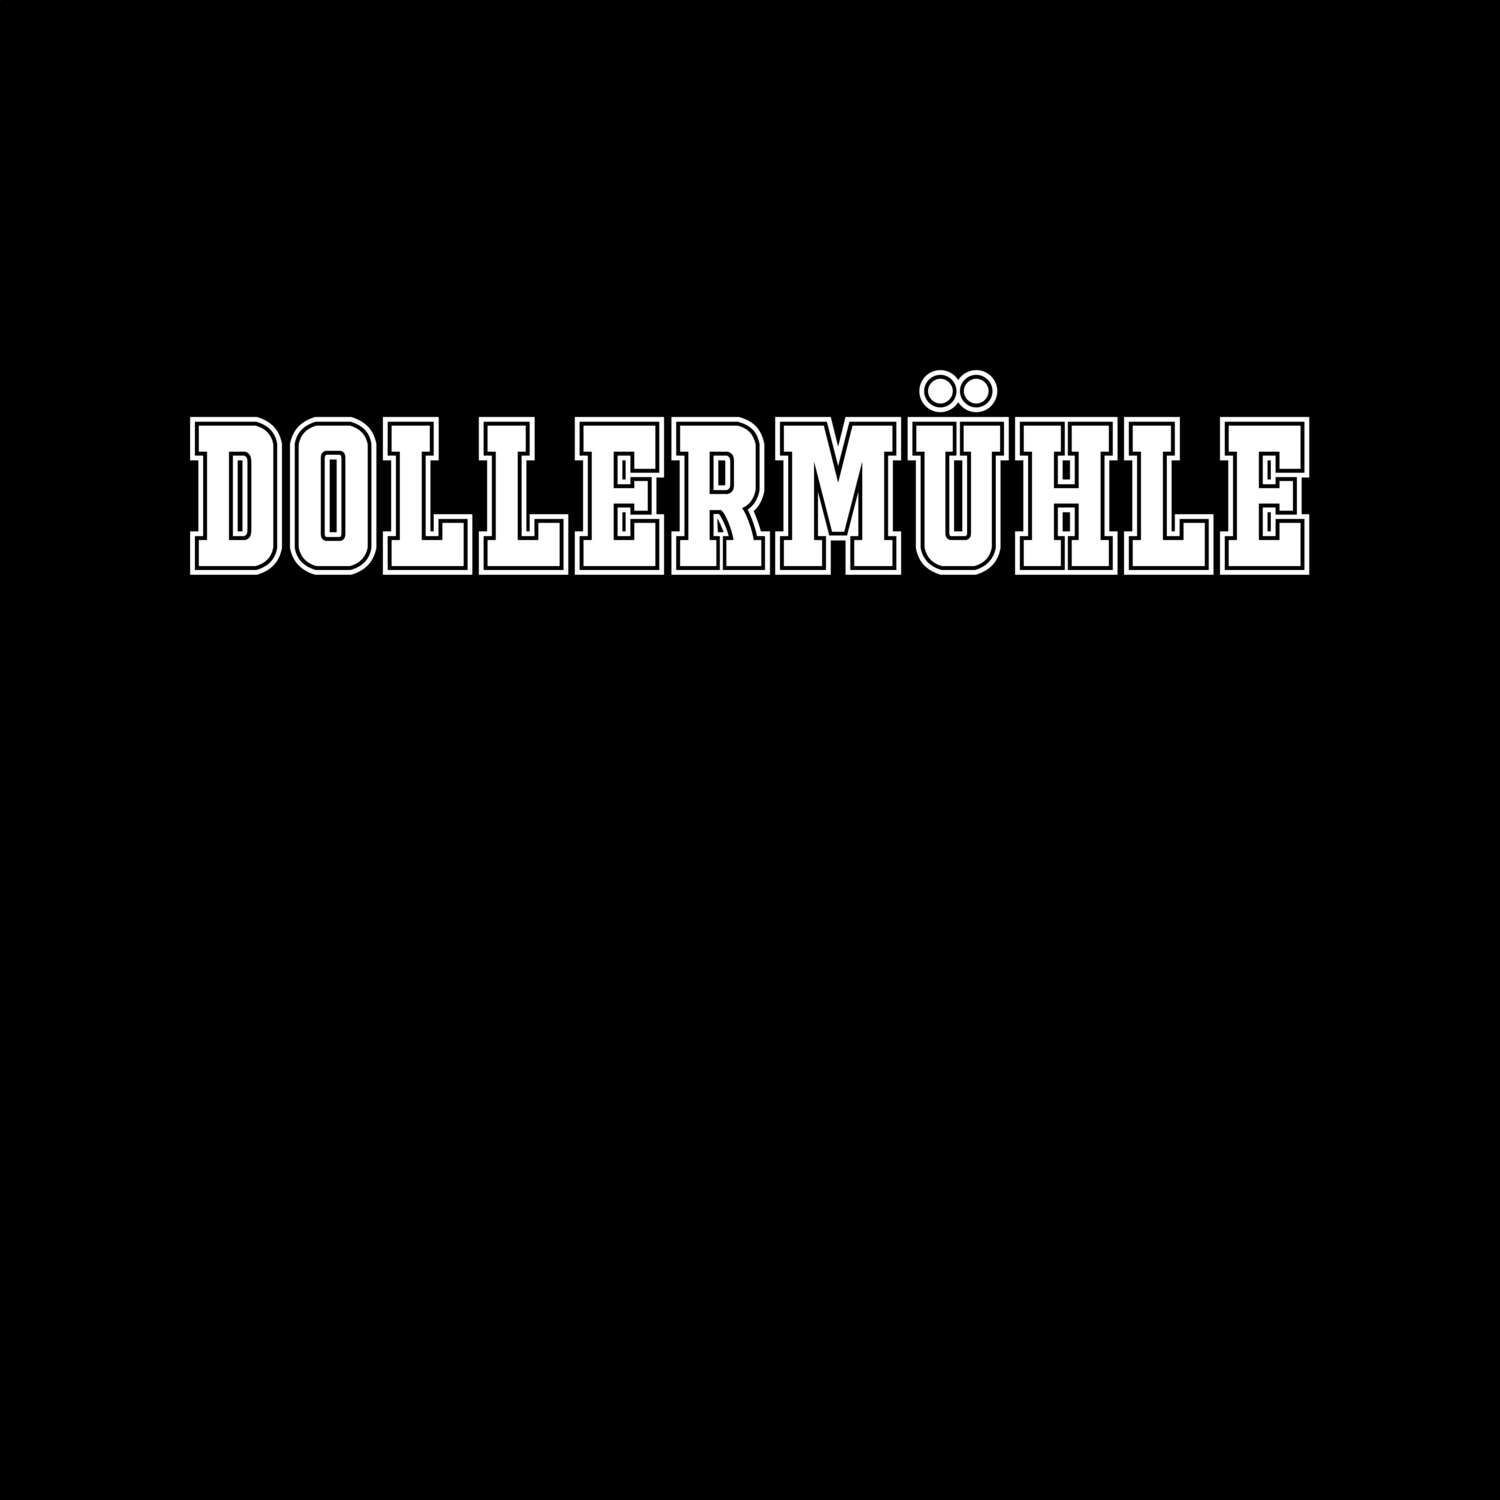 Dollermühle T-Shirt »Classic«